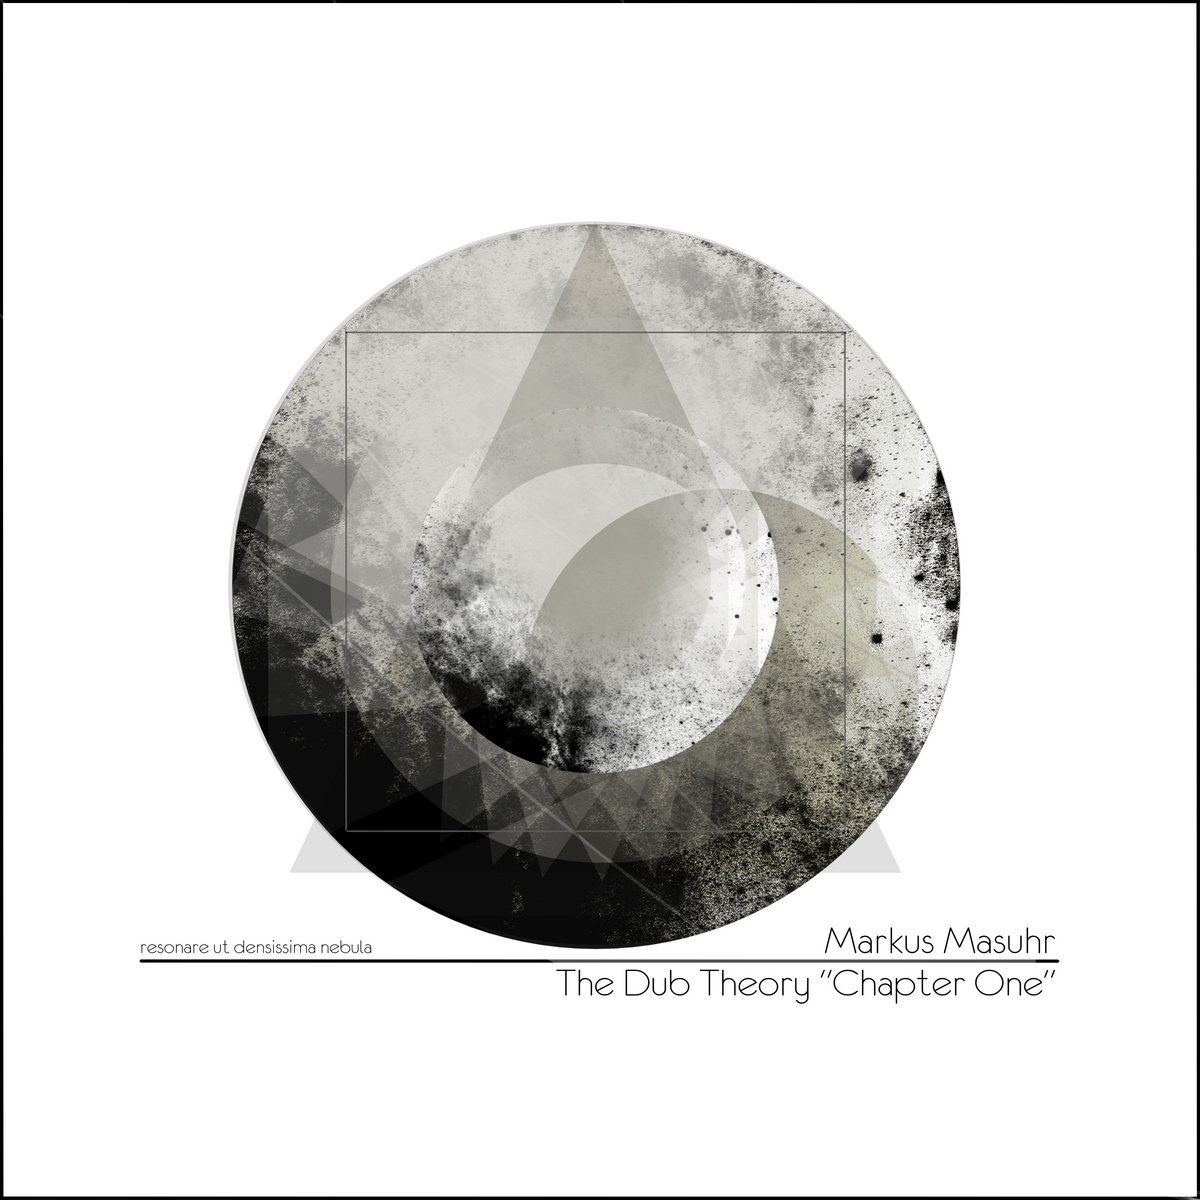 Markus Masuhr – The Dub Theory "Chapter One"